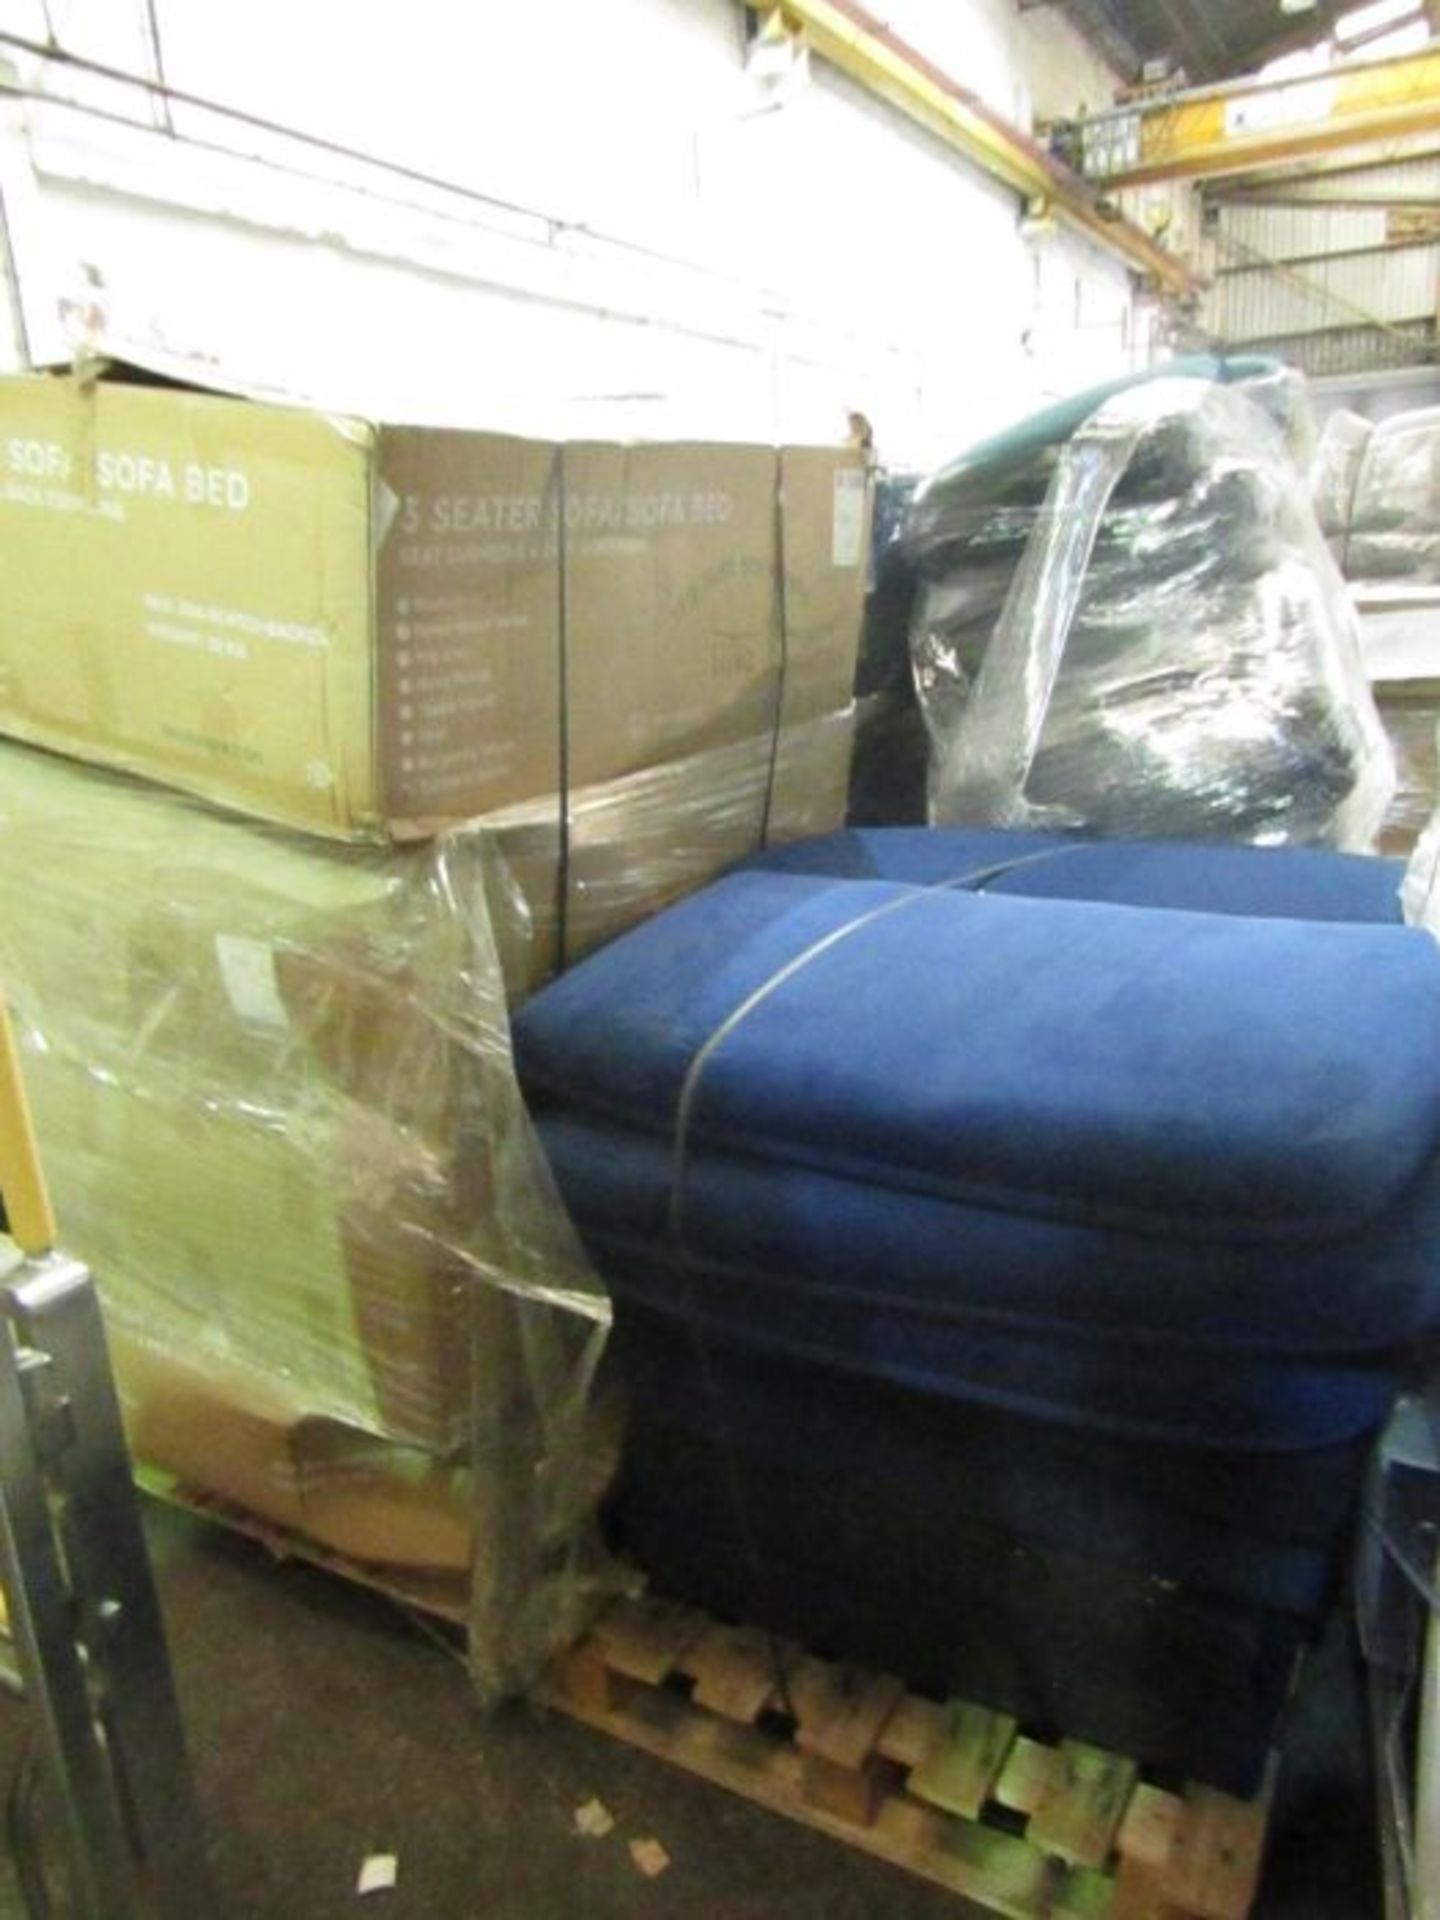 0% Buyers Premium, 24 Pallets of Genuine SNUG SOFA parts - Mixed Lots of Bases Backs Arms Cushions - Image 13 of 16